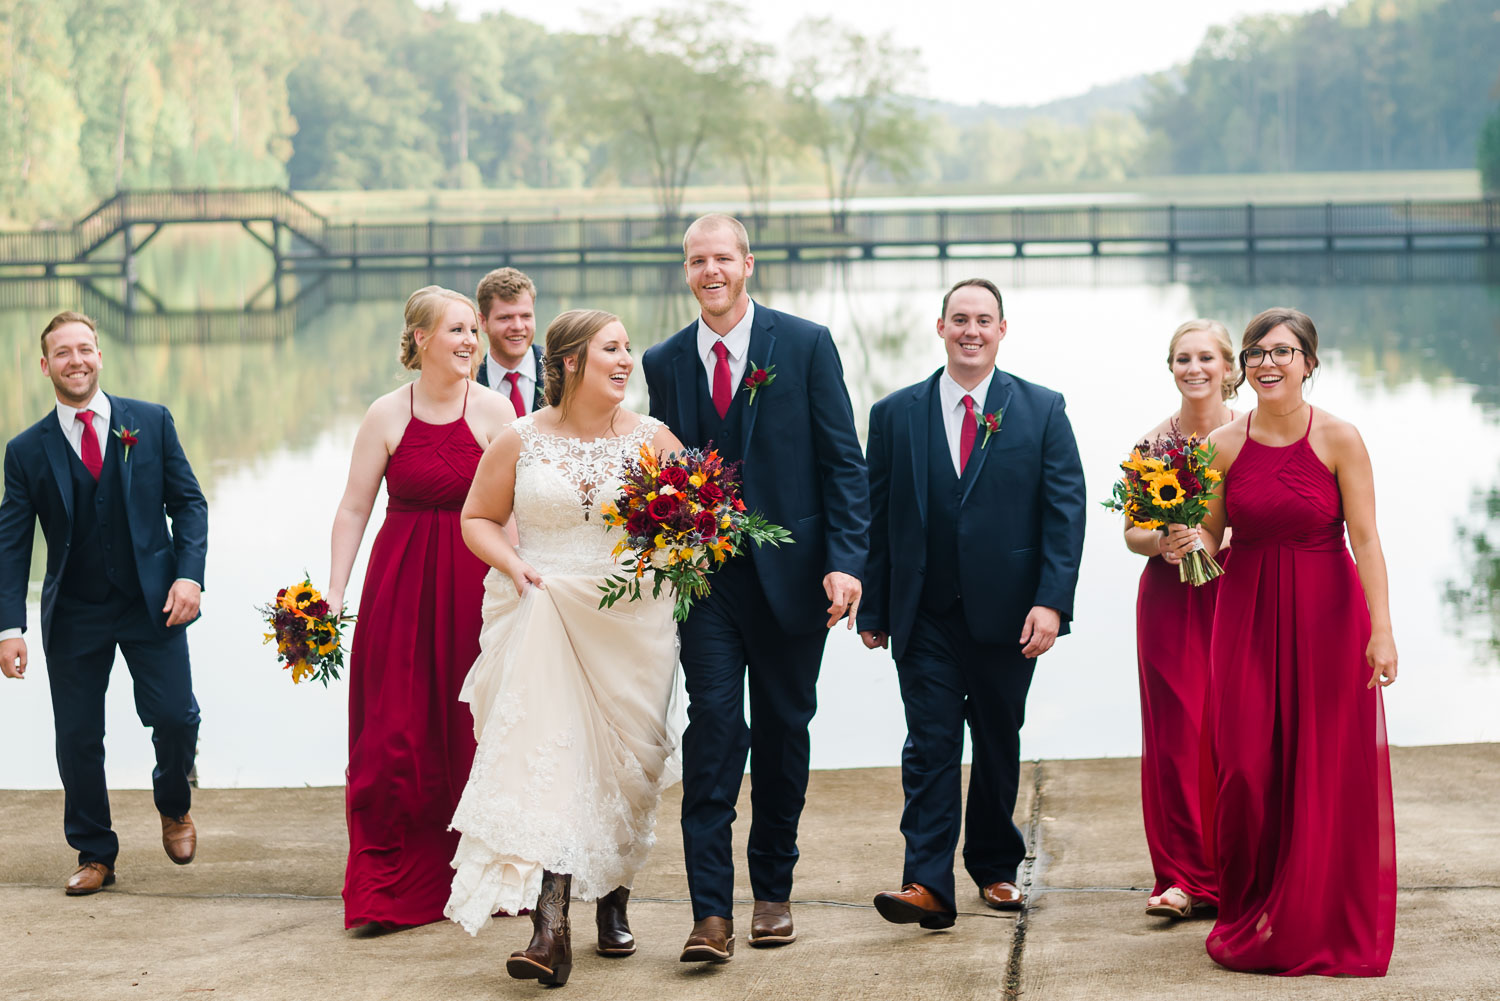 wedding party in red, white and blue walking in front of pond at Indigo Falls venue near Atlanta GA